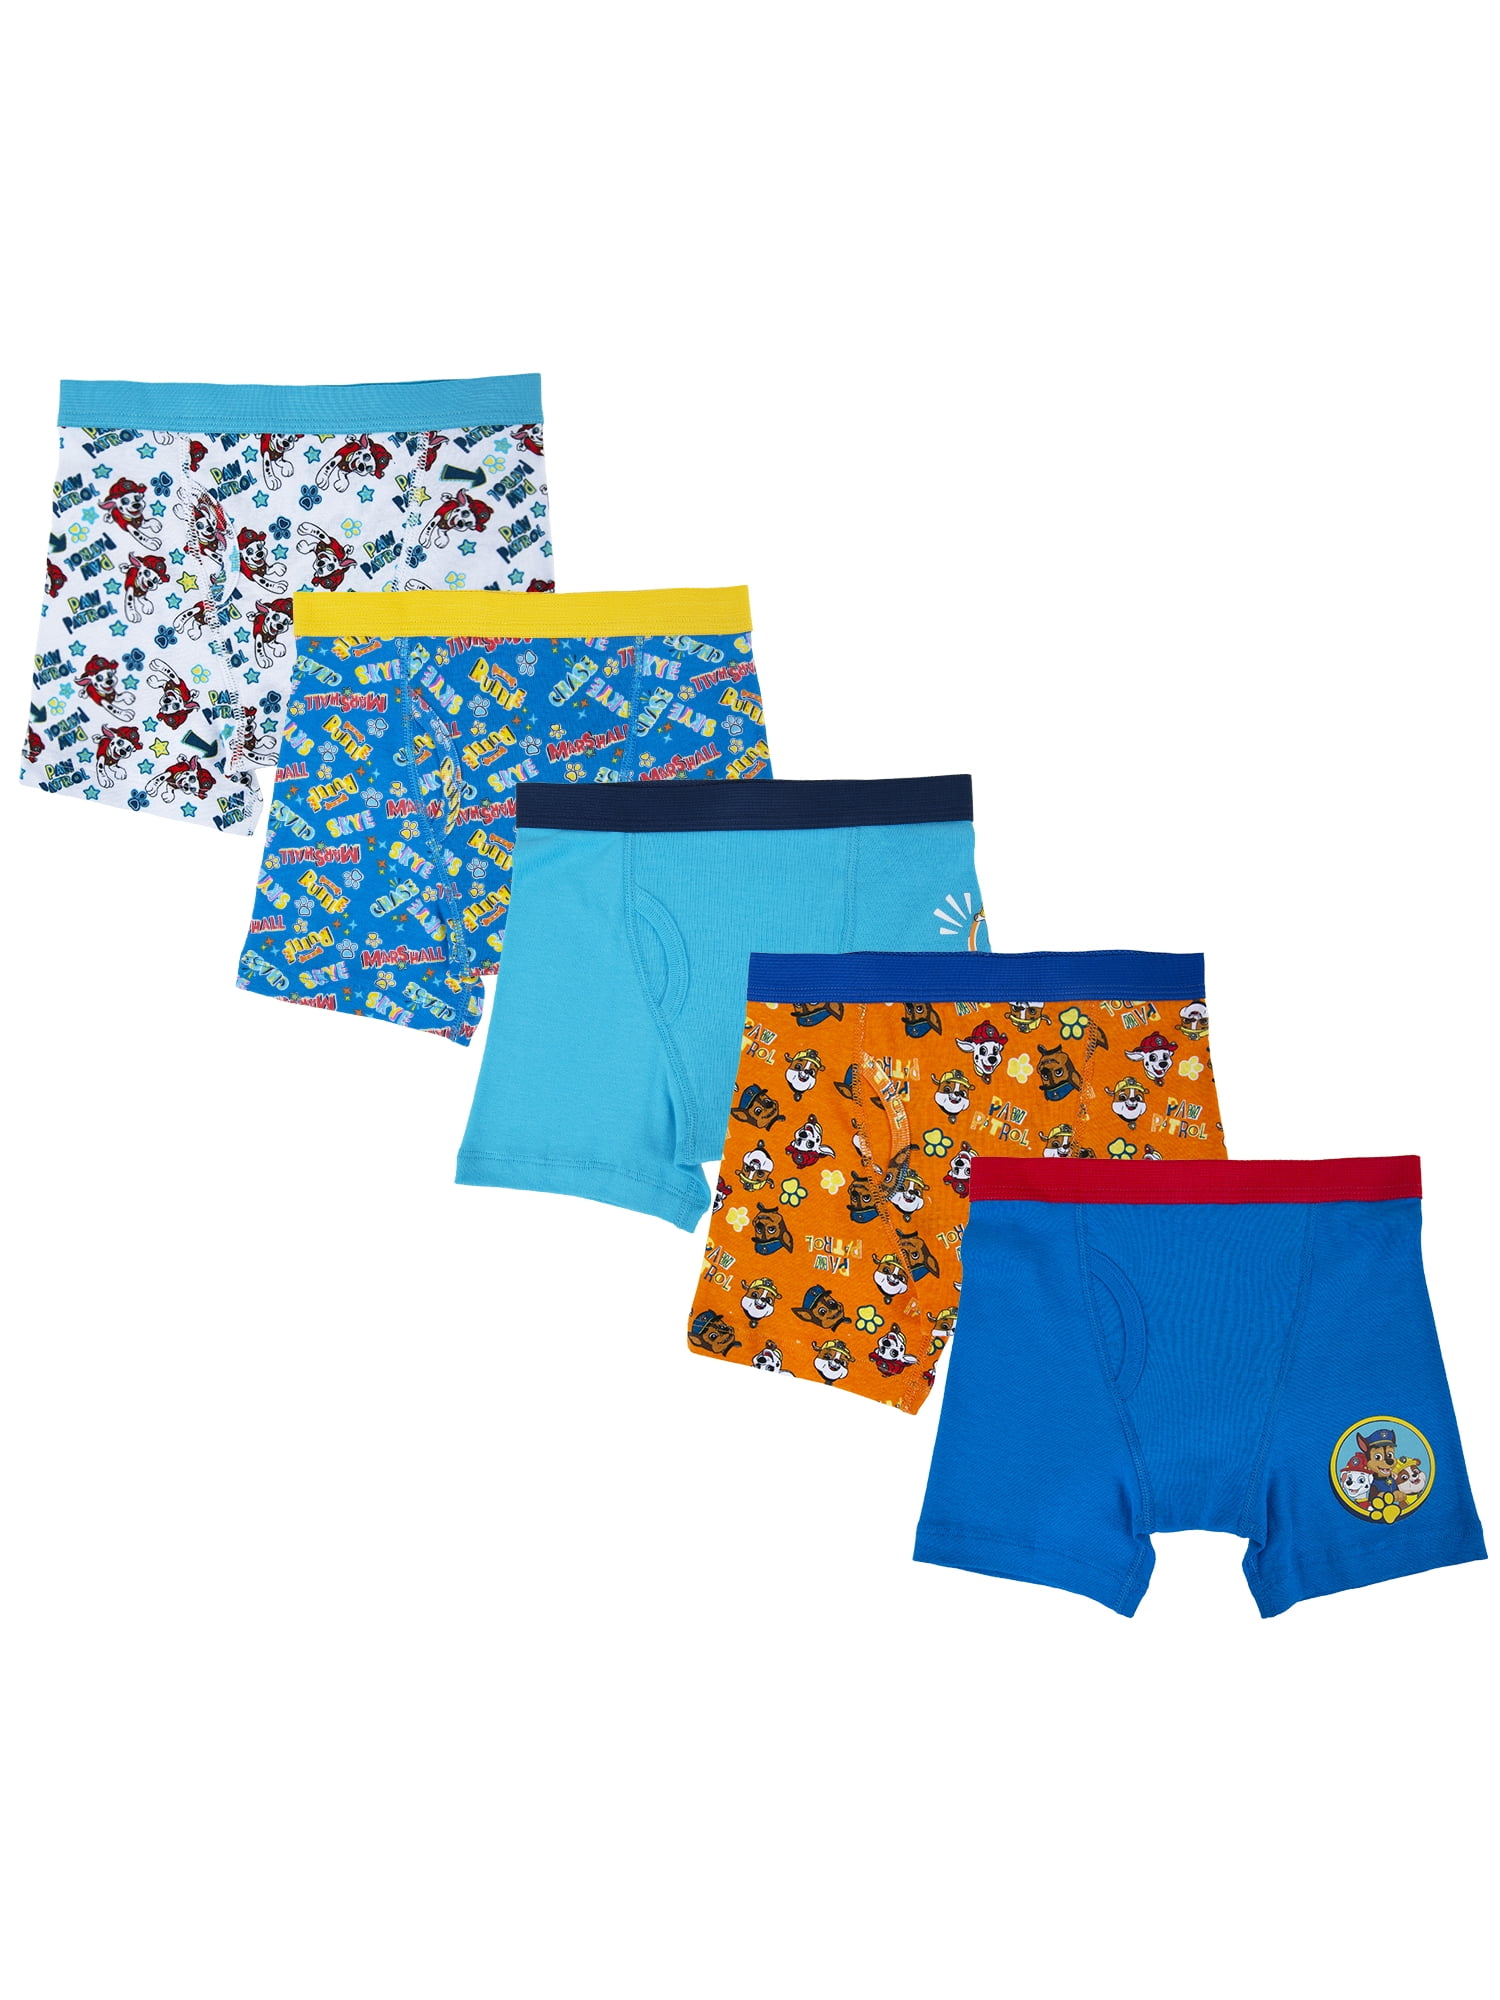 NWT Carter's 2-3 Years 2T-3T Vehicles Planes Cars Briefs Underwear 7 Pack 